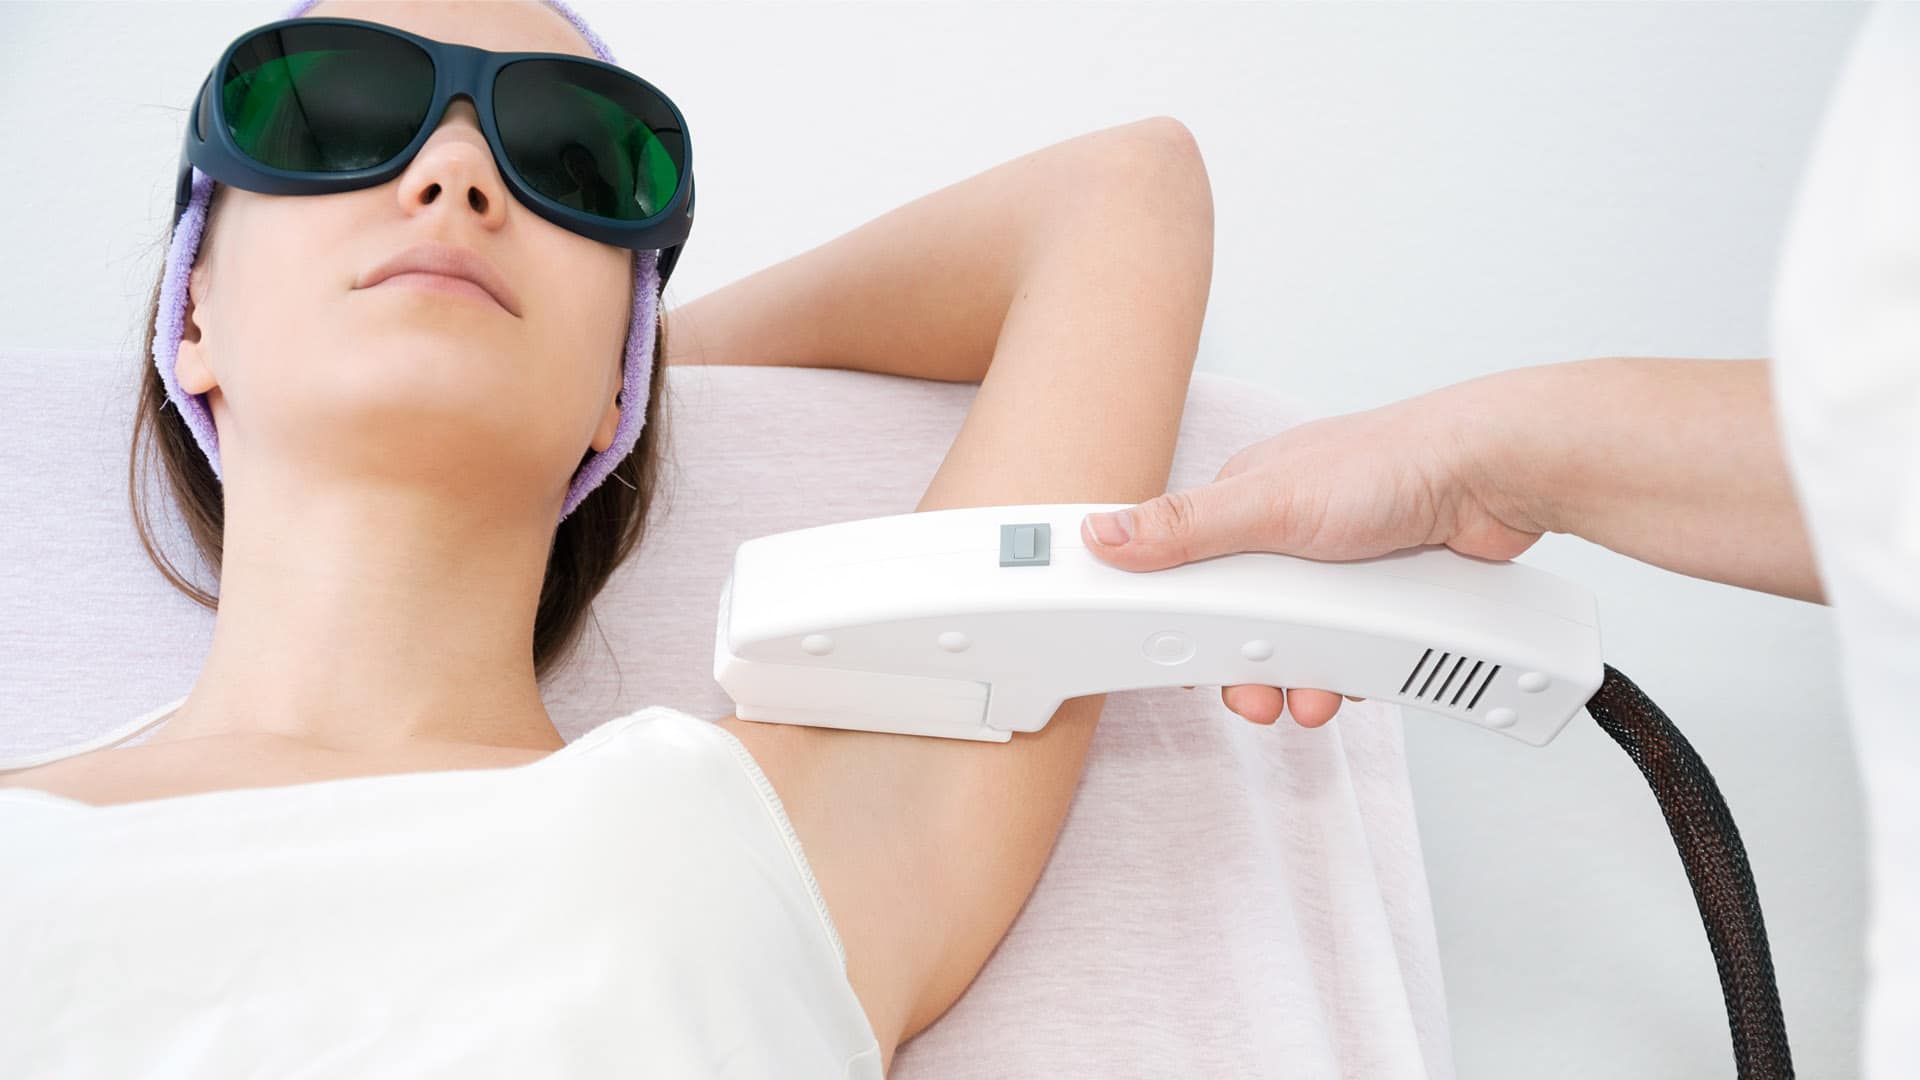 Professional Cosmetics Company Offering Laser Hair Removal Services with 808nm Diodes and 755/808/1064 Diode Lasers